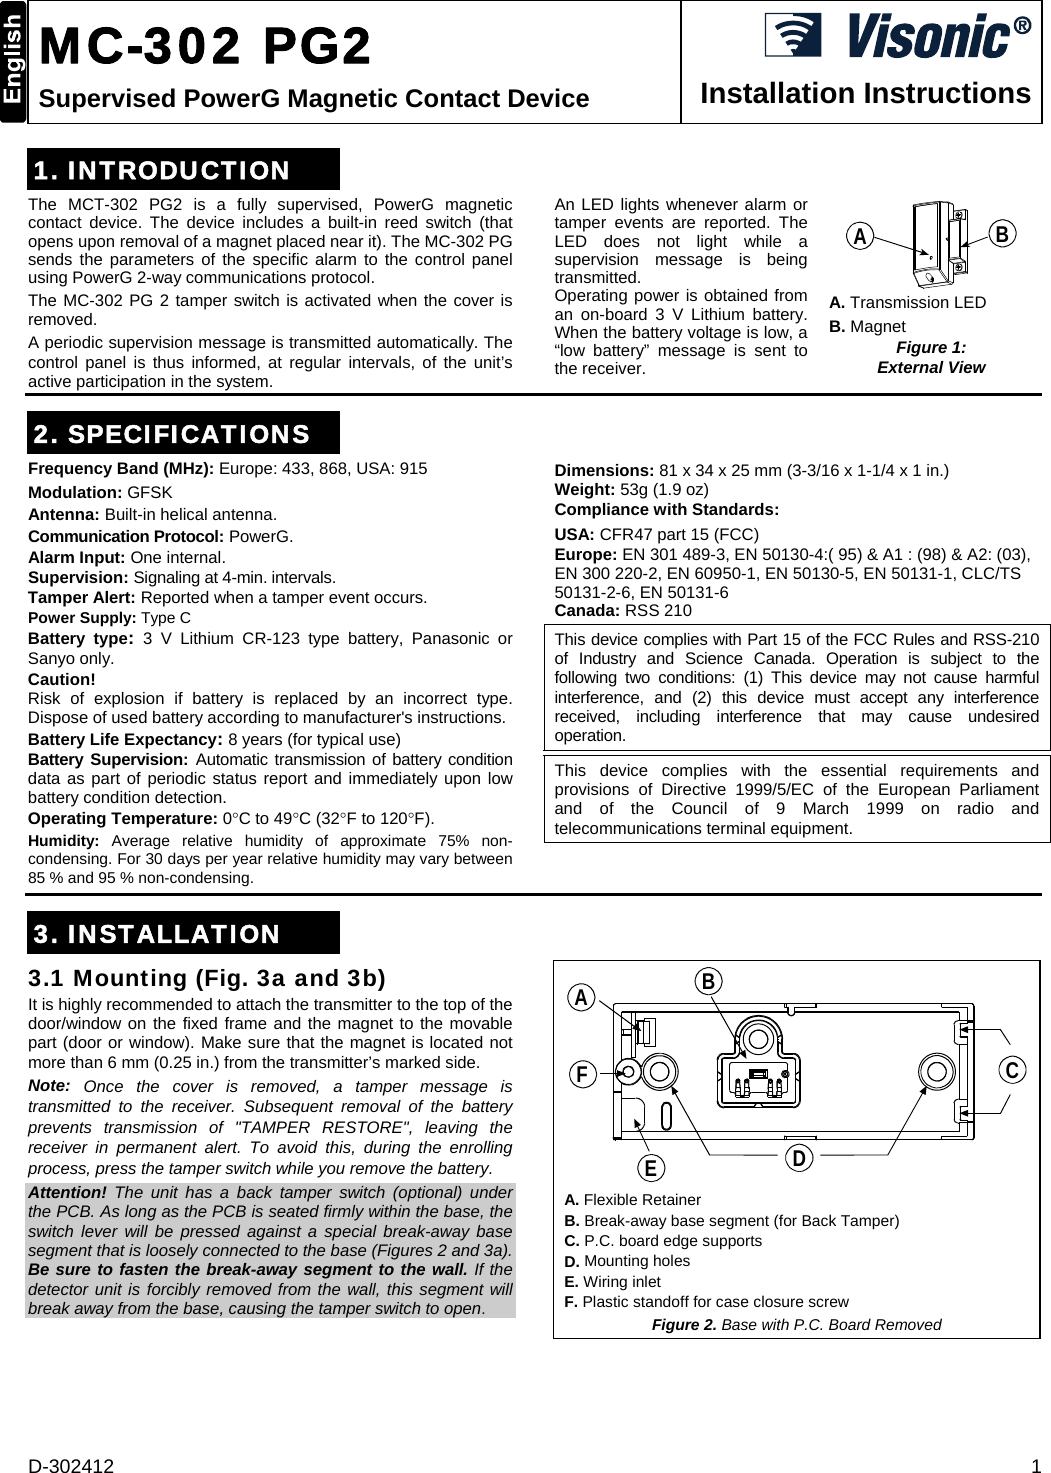 D-302412  1  MC-302 PG2 Supervised PowerG Magnetic Contact Device  Installation Instructions 1. INTRODUCTION The MCT-302 PG2 is a fully supervised, PowerG magnetic contact device. The device includes a built-in reed switch (that opens upon removal of a magnet placed near it). The MC-302 PG sends the parameters of the specific alarm to the control panel using PowerG 2-way communications protocol.  The MC-302 PG 2 tamper switch is activated when the cover is removed. A periodic supervision message is transmitted automatically. The control panel is thus informed, at regular intervals, of the unit’s active participation in the system. An LED lights whenever alarm or tamper events are reported. The LED does not light while a supervision message is being transmitted. Operating power is obtained from an on-board 3 V Lithium battery. When the battery voltage is low, a “low battery” message is sent to the receiver.  BA A. Transmission LED  B. Magnet Figure 1:  External View   2. SPECIFICATIONS Frequency Band (MHz): Europe: 433, 868, USA: 915 Modulation: GFSK  Antenna: Built-in helical antenna.  Communication Protocol: PowerG. Alarm Input: One internal. Supervision: Signaling at 4-min. intervals. Tamper Alert: Reported when a tamper event occurs. Power Supply: Type C Battery type:  3 V Lithium CR-123 type battery, Panasonic or Sanyo only. Caution! Risk of explosion if battery is replaced by an incorrect type. Dispose of used battery according to manufacturer&apos;s instructions. Battery Life Expectancy: 8 years (for typical use) Battery Supervision: Automatic transmission of battery condition data as part of periodic status report and immediately upon low battery condition detection. Operating Temperature: 0C to 49C (32F to 120F). Humidity:  Average relative humidity of approximate 75% non-condensing. For 30 days per year relative humidity may vary between 85 % and 95 % non-condensing. Dimensions: 81 x 34 x 25 mm (3-3/16 x 1-1/4 x 1 in.) Weight: 53g (1.9 oz) Compliance with Standards:  USA: CFR47 part 15 (FCC) Europe: EN 301 489-3, EN 50130-4:( 95) &amp; A1 : (98) &amp; A2: (03), EN 300 220-2, EN 60950-1, EN 50130-5, EN 50131-1, CLC/TS 50131-2-6, EN 50131-6 Canada: RSS 210 This device complies with Part 15 of the FCC Rules and RSS-210 of Industry and Science Canada. Operation is subject to the following two conditions: (1) This device may not cause harmful interference, and (2) this device must accept any interference received, including interference that may cause undesired operation. This device complies with the essential requirements and provisions of Directive 1999/5/EC of the European Parliament and of the Council of 9 March 1999 on radio and telecommunications terminal equipment.    3. INSTALLATION 3.1 Mounting (Fig. 3a and 3b) It is highly recommended to attach the transmitter to the top of the door/window on the fixed frame and the magnet to the movable part (door or window). Make sure that the magnet is located not more than 6 mm (0.25 in.) from the transmitter’s marked side.  Note:  Once the cover is removed, a tamper message is transmitted to the receiver. Subsequent removal of the battery prevents transmission of &quot;TAMPER RESTORE&quot;, leaving the receiver in permanent alert. To avoid this, during the enrolling process, press the tamper switch while you remove the battery. Attention! The unit has a back tamper switch (optional) under the PCB. As long as the PCB is seated firmly within the base, the switch lever will be pressed against a special break-away base segment that is loosely connected to the base (Figures 2 and 3a). Be sure to fasten the break-away segment to the wall. If the detector unit is forcibly removed from the wall, this segment will break away from the base, causing the tamper switch to open.  BACDEF A. Flexible Retainer B. Break-away base segment (for Back Tamper) C. P.C. board edge supports D. Mounting holes E. Wiring inlet F. Plastic standoff for case closure screw Figure 2. Base with P.C. Board Removed 